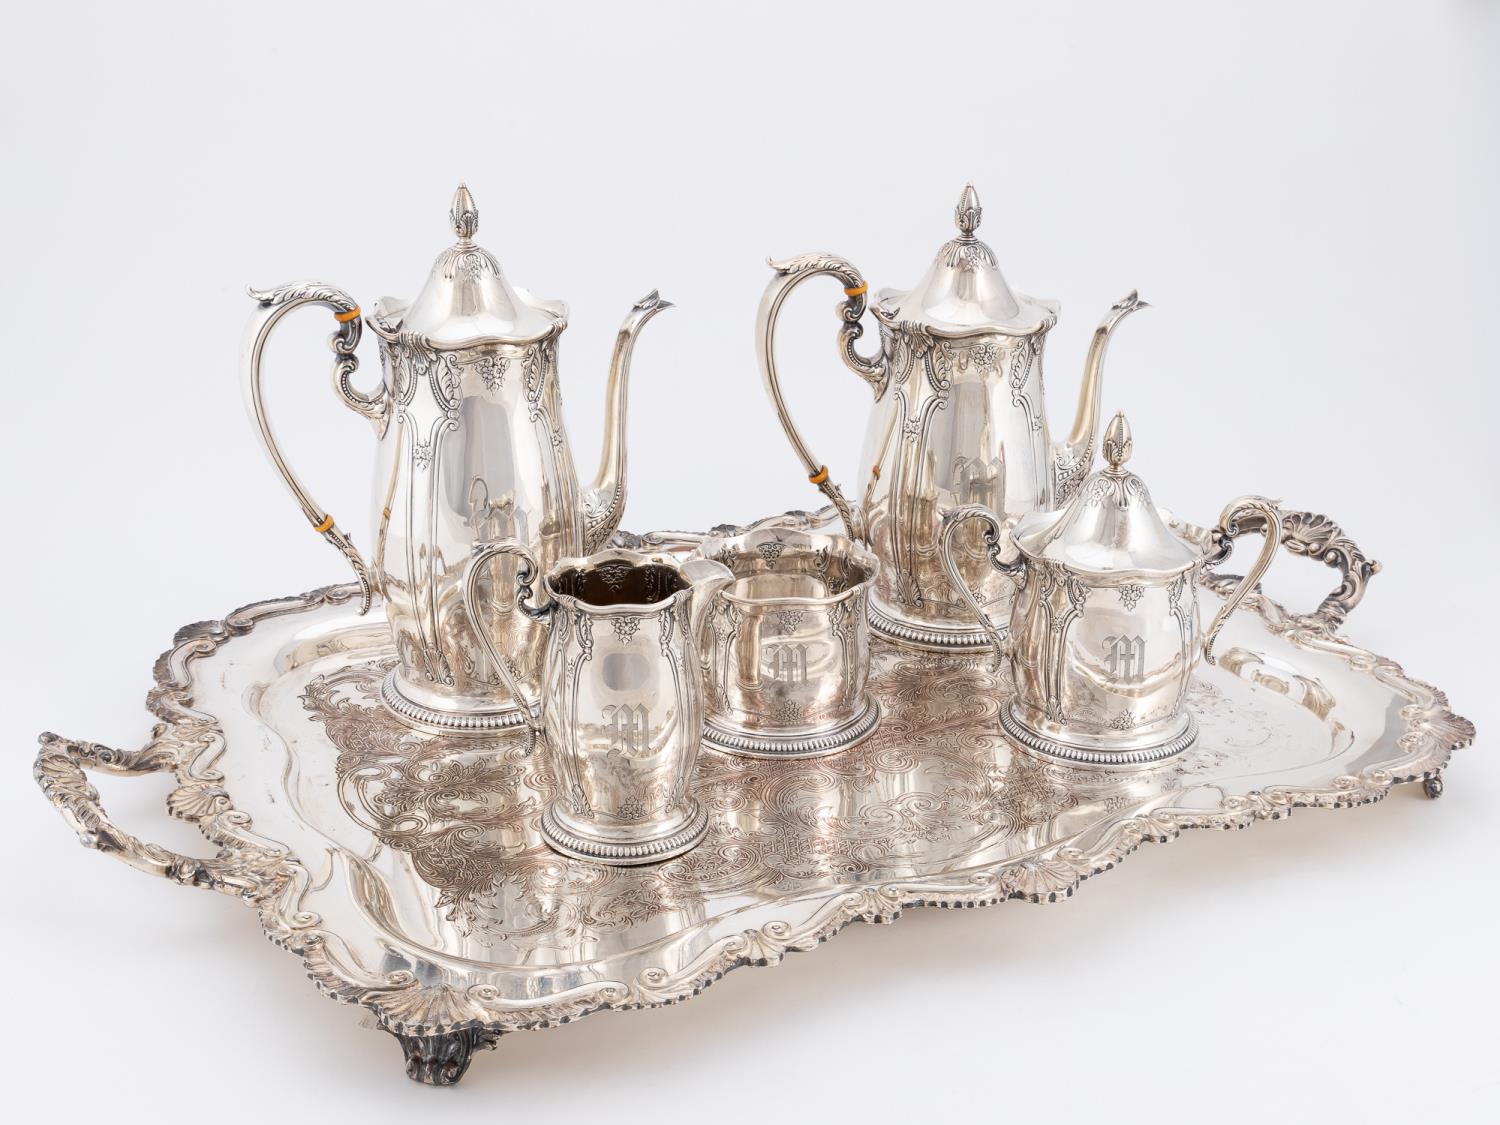 WALLACE STERLING 5PC TEA SERVICE 35b2a6